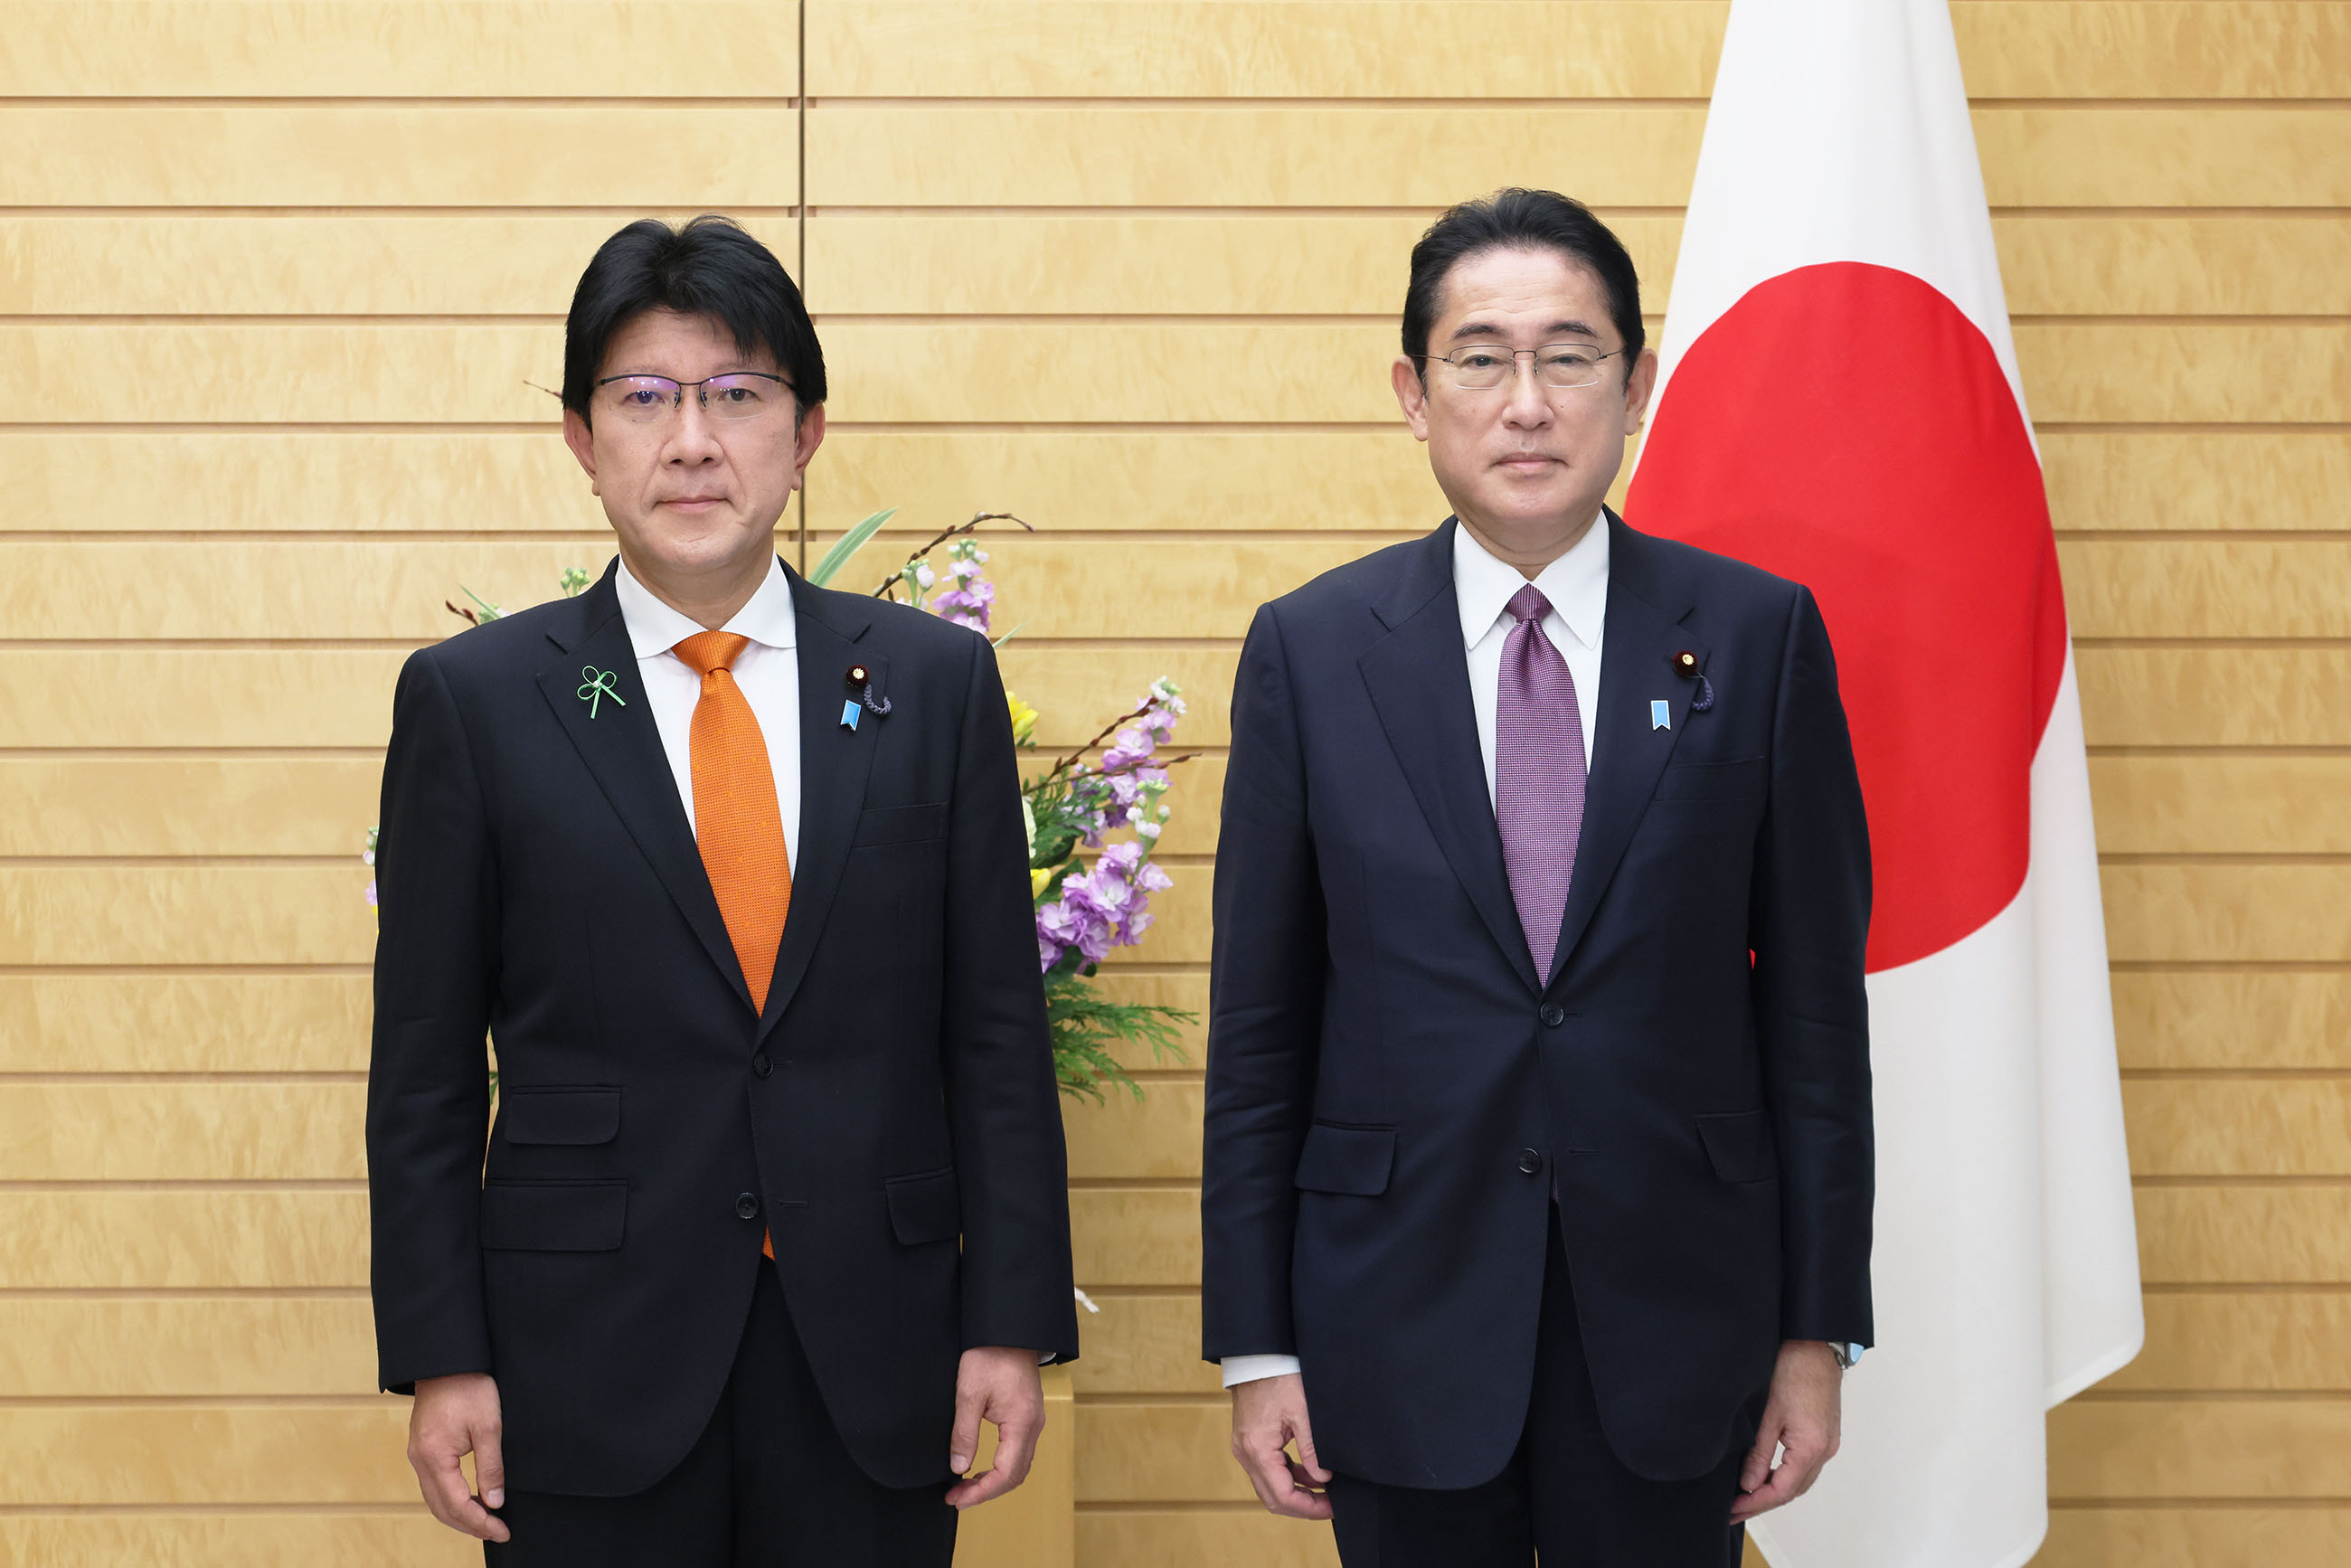 Prime Minister Kishida attending a photograph session with the newly appointed Parliamentary Vice-Minister Hasegawa (1)